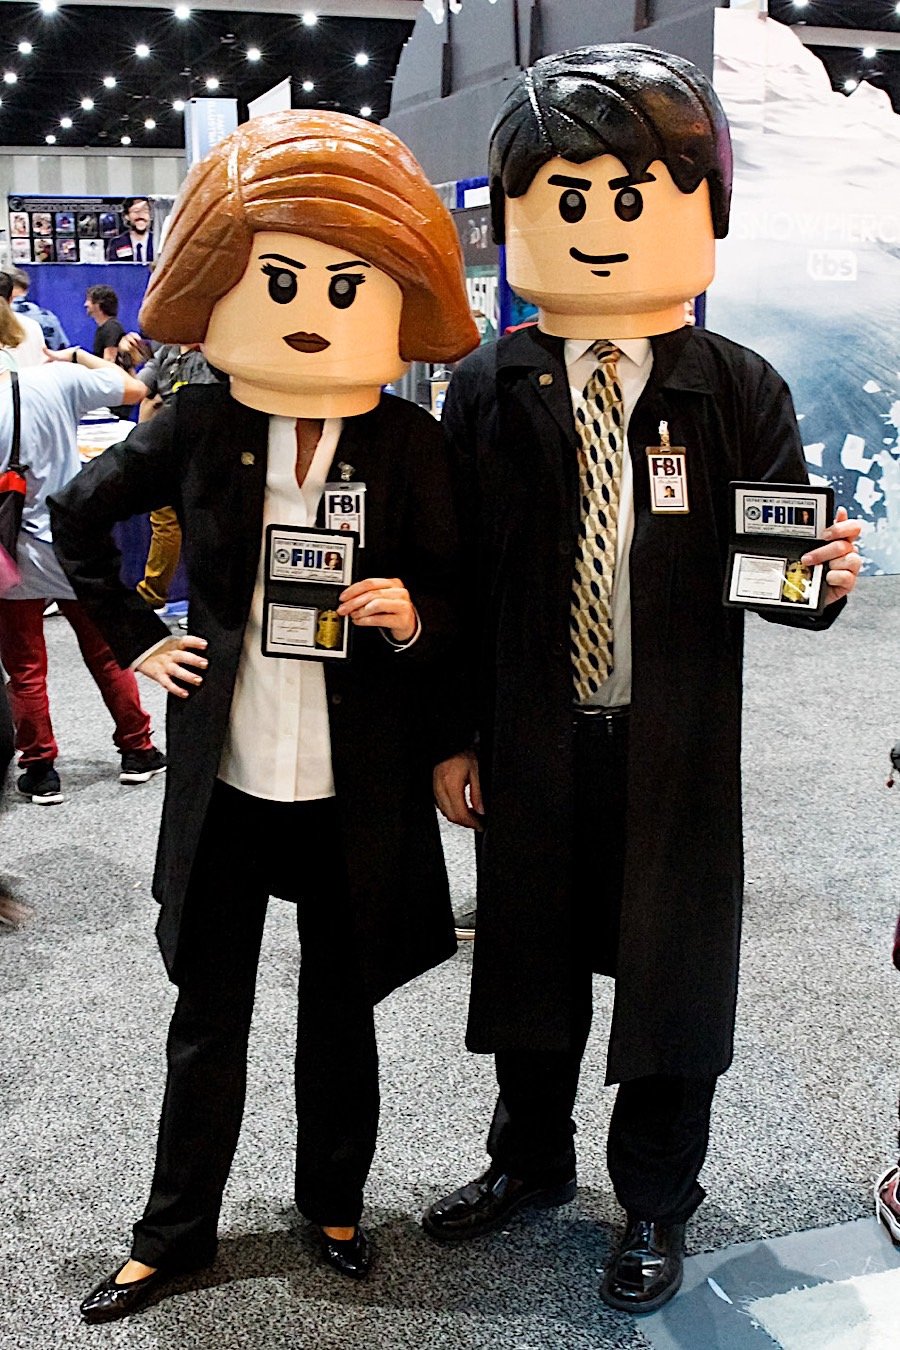 LEGO Mulder and Scully from the X-Files